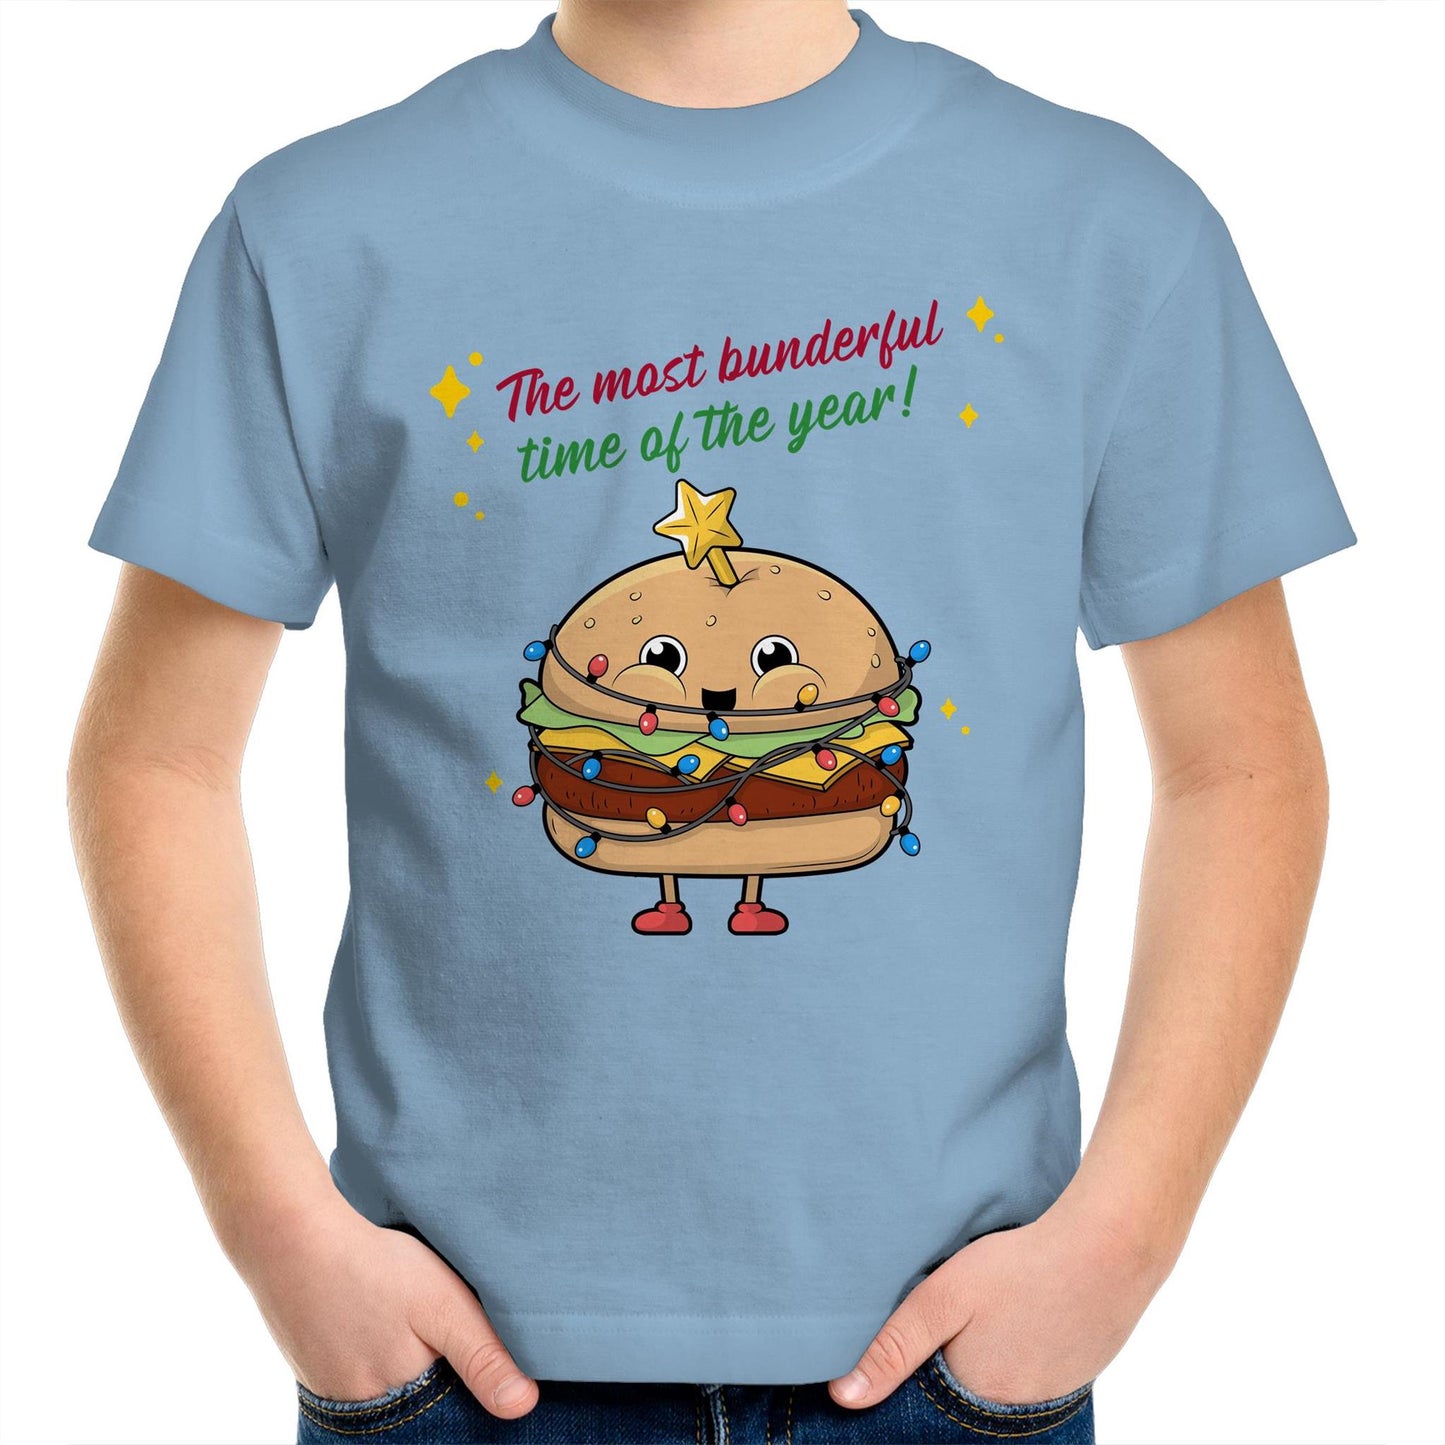 The Most Bunderful Time Of The Year - Kids Youth Crew T-Shirt Carolina Blue Christmas Kids T-shirt Merry Christmas